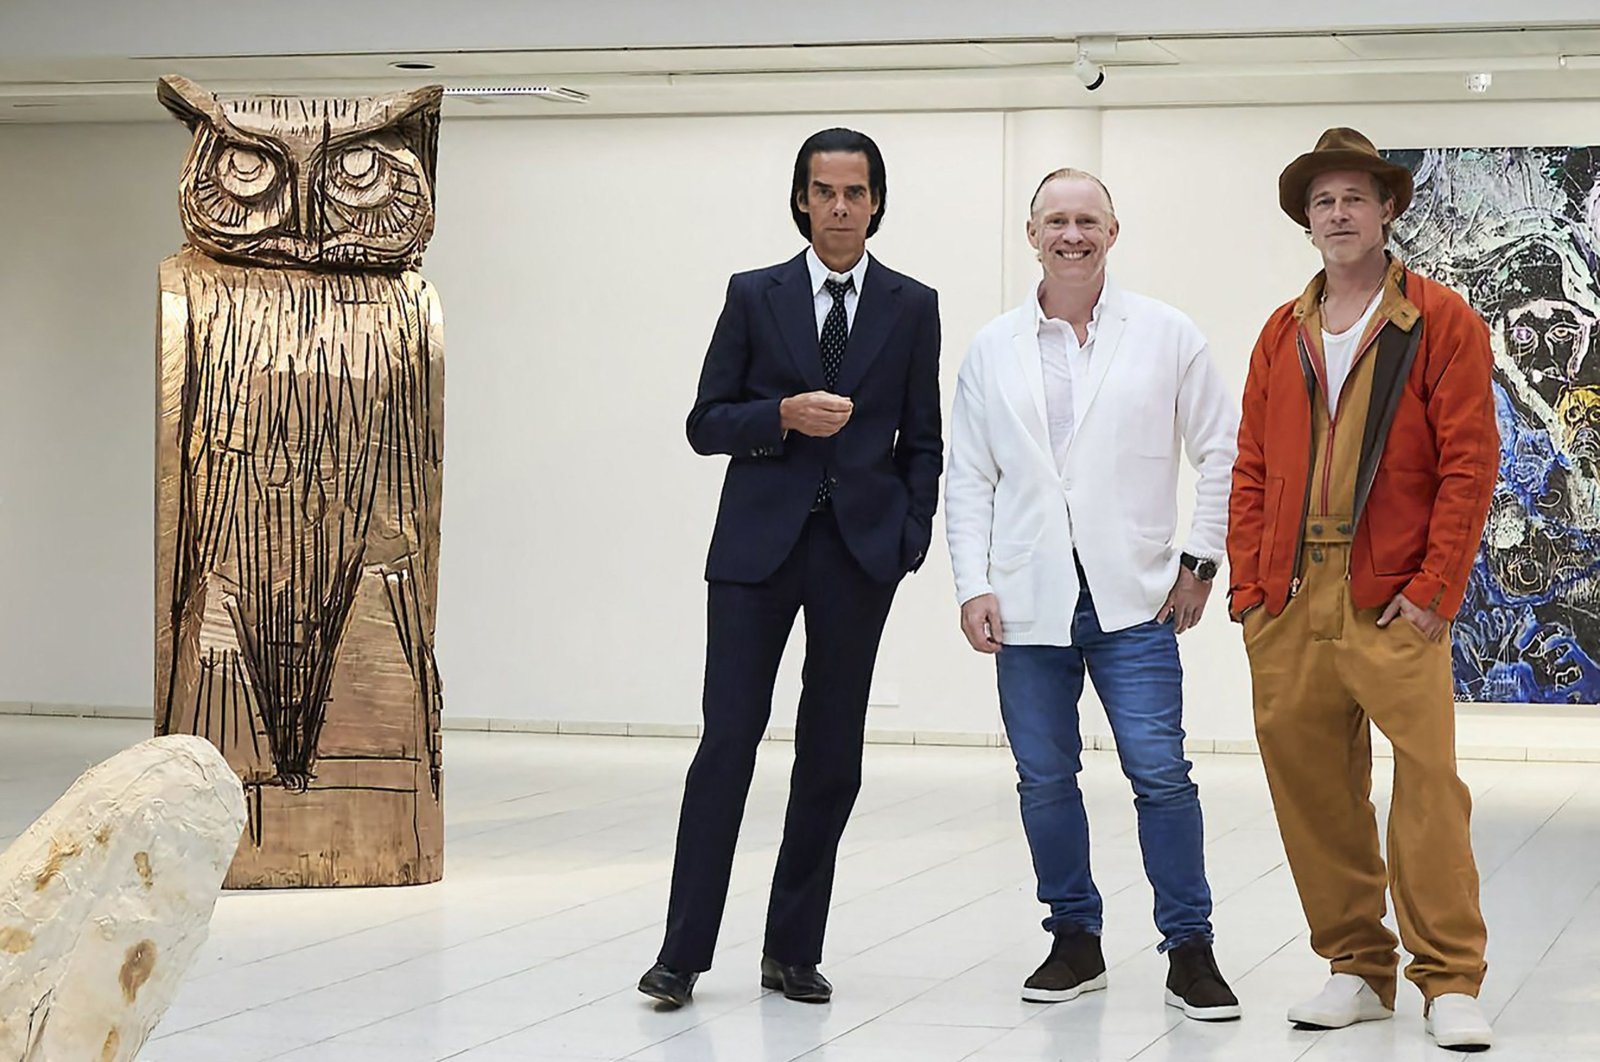 This handout photo taken on Sept. 17, 2022, and received on Sept. 19, 2022, shows British artist Thomas Houseago (C) posing with U.S. actor Brad Pitt (R) and Australian musician Nick Cave prior to the opening of the exhibition &quot;Thomas Houseago - WE with Nick Cave and Brad Bitt&quot; at The Sara Hilden Art Museum in Tampere, Finland. (AFP Photo)